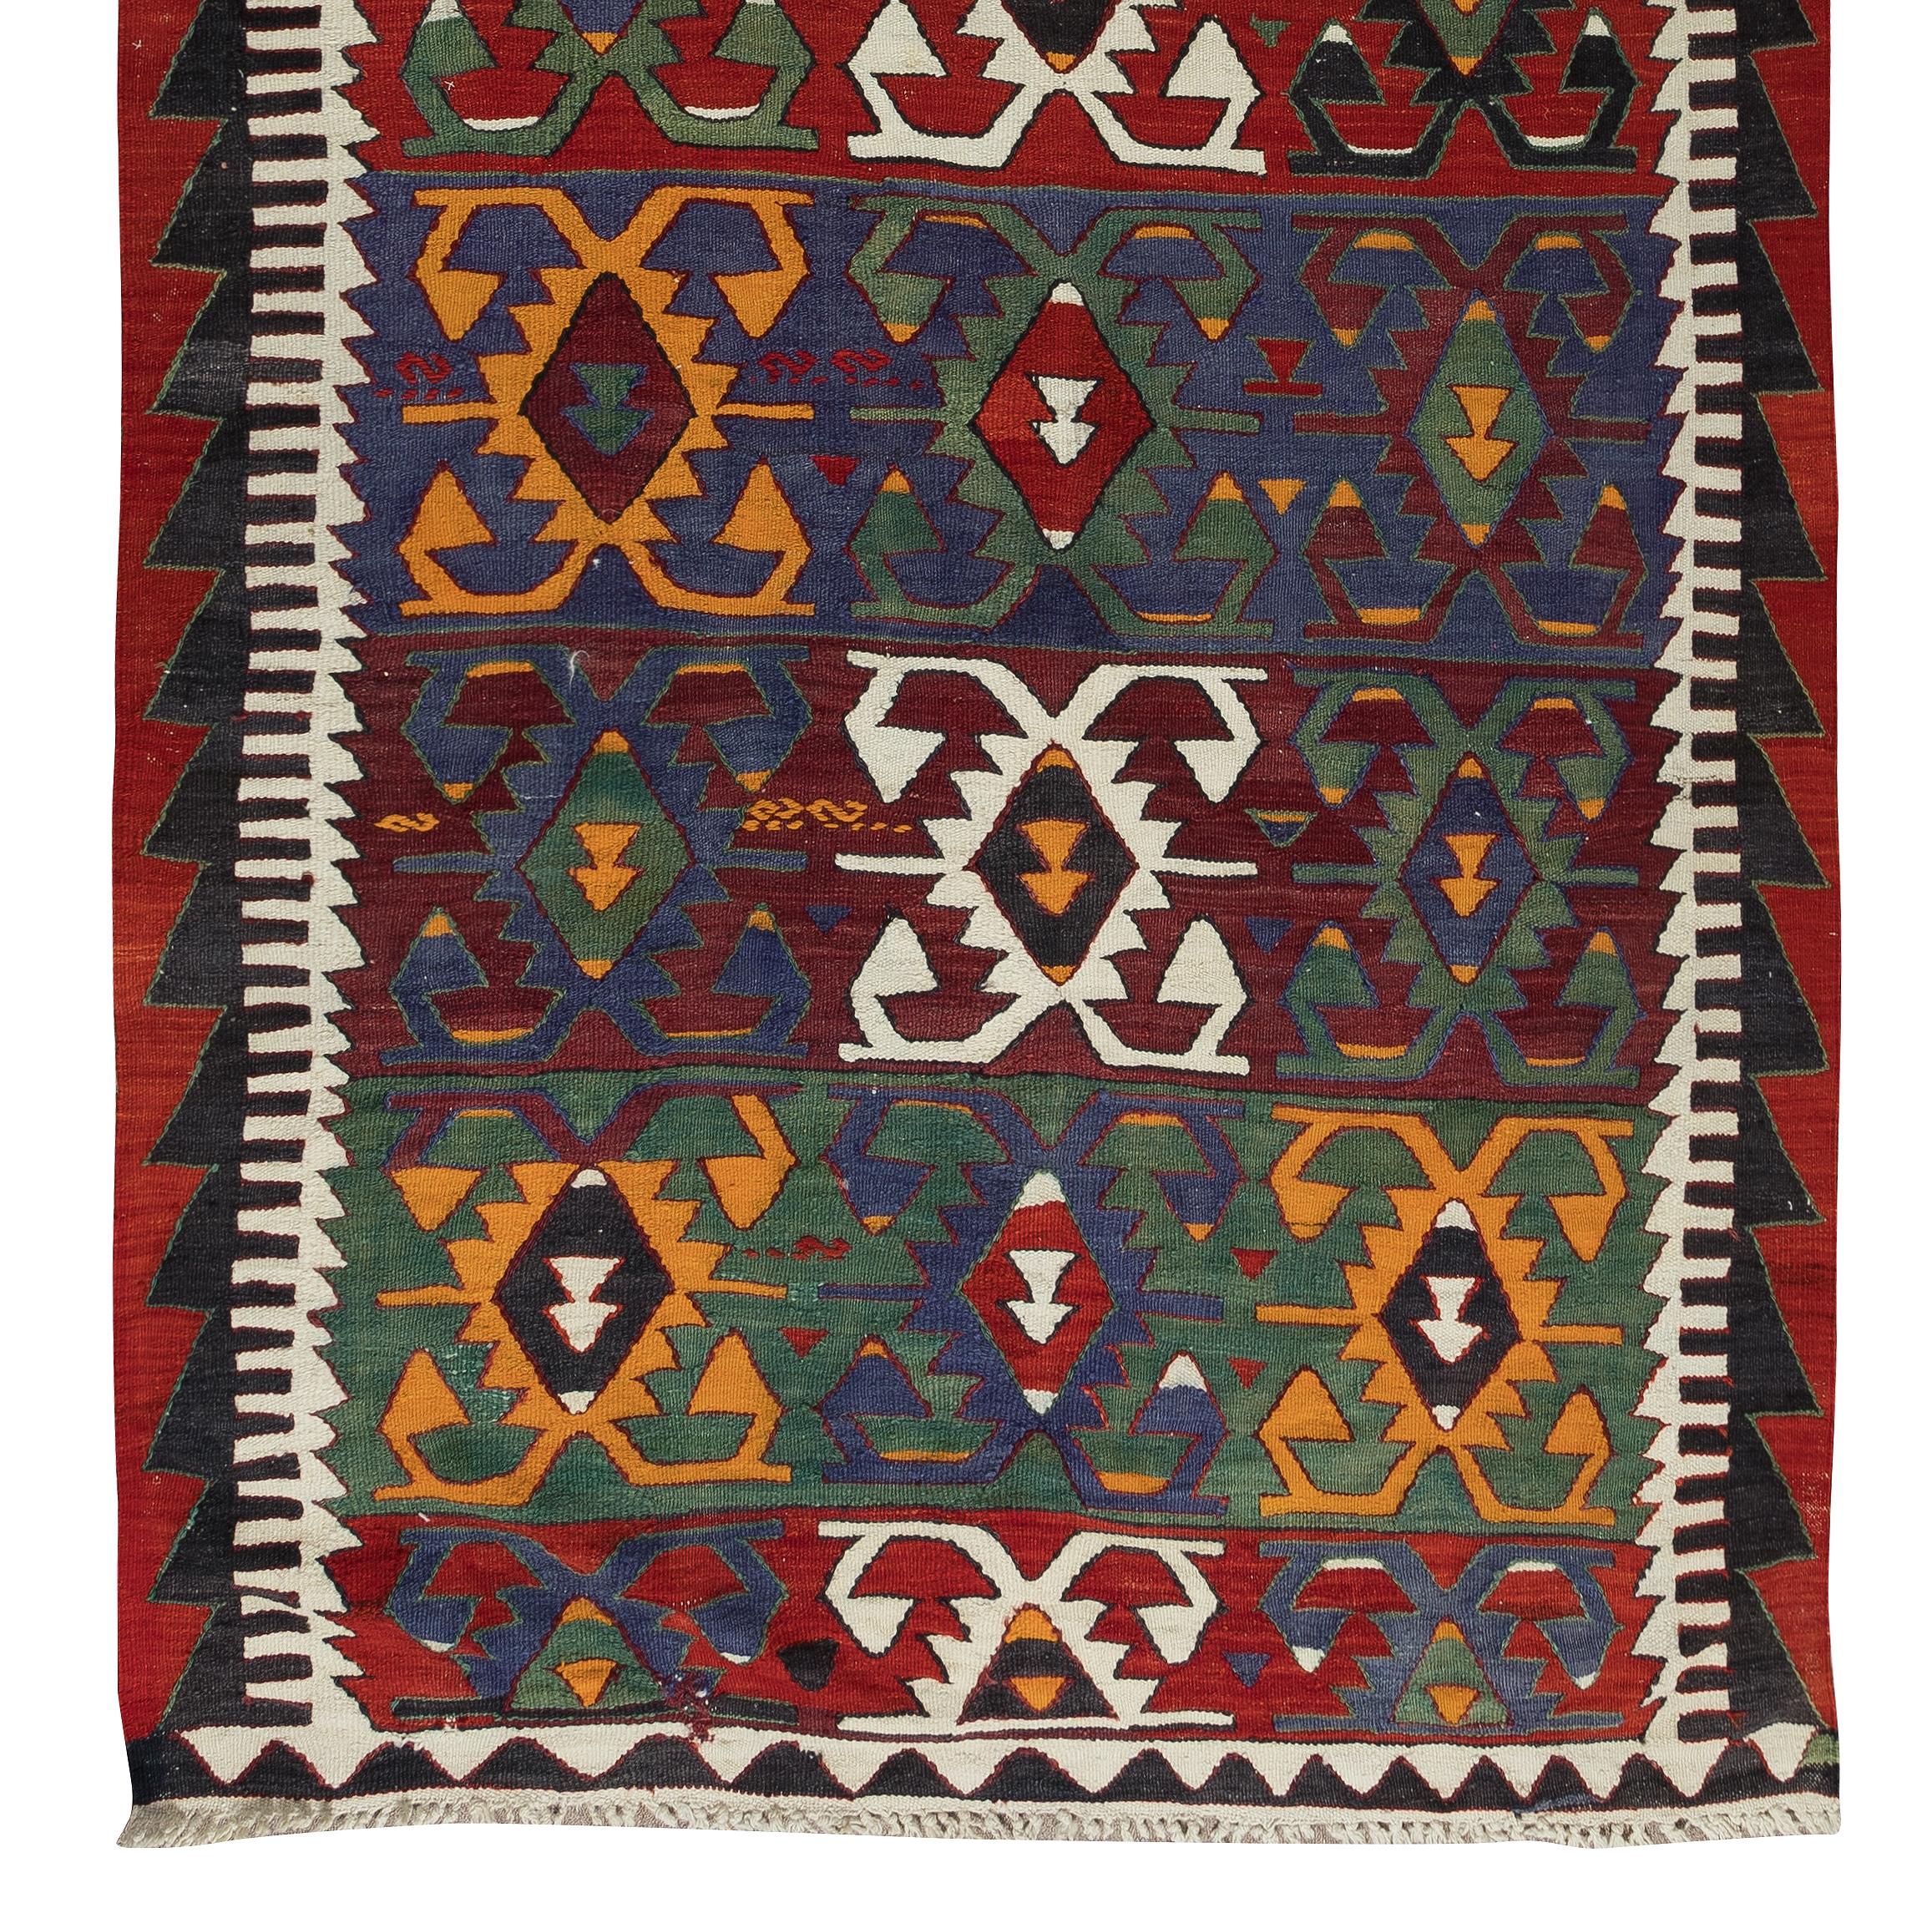 5.4x10.8 Ft Colorful Vintage Hand-Woven Turkish Kilim, Flat-Weave Rug, 100% Wool For Sale 1